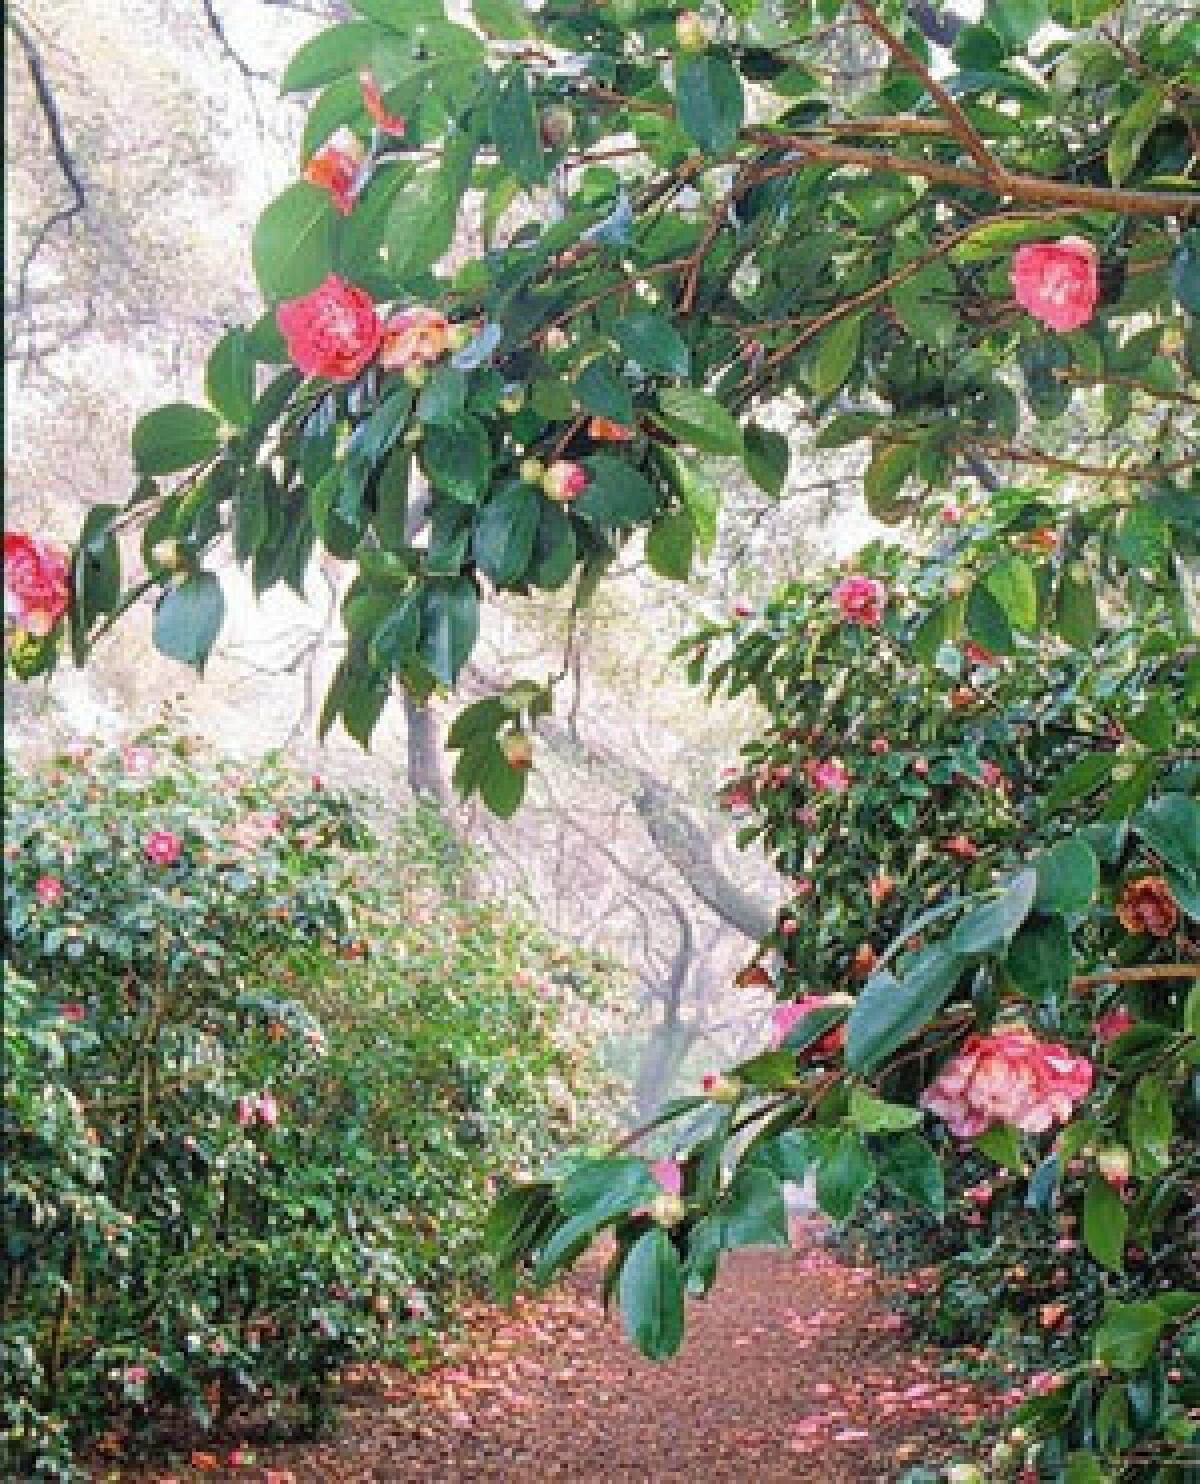 Camellias make for colorful walks at Descanso Gardens, which is celebrating their winter blooms Jan. 11-12.